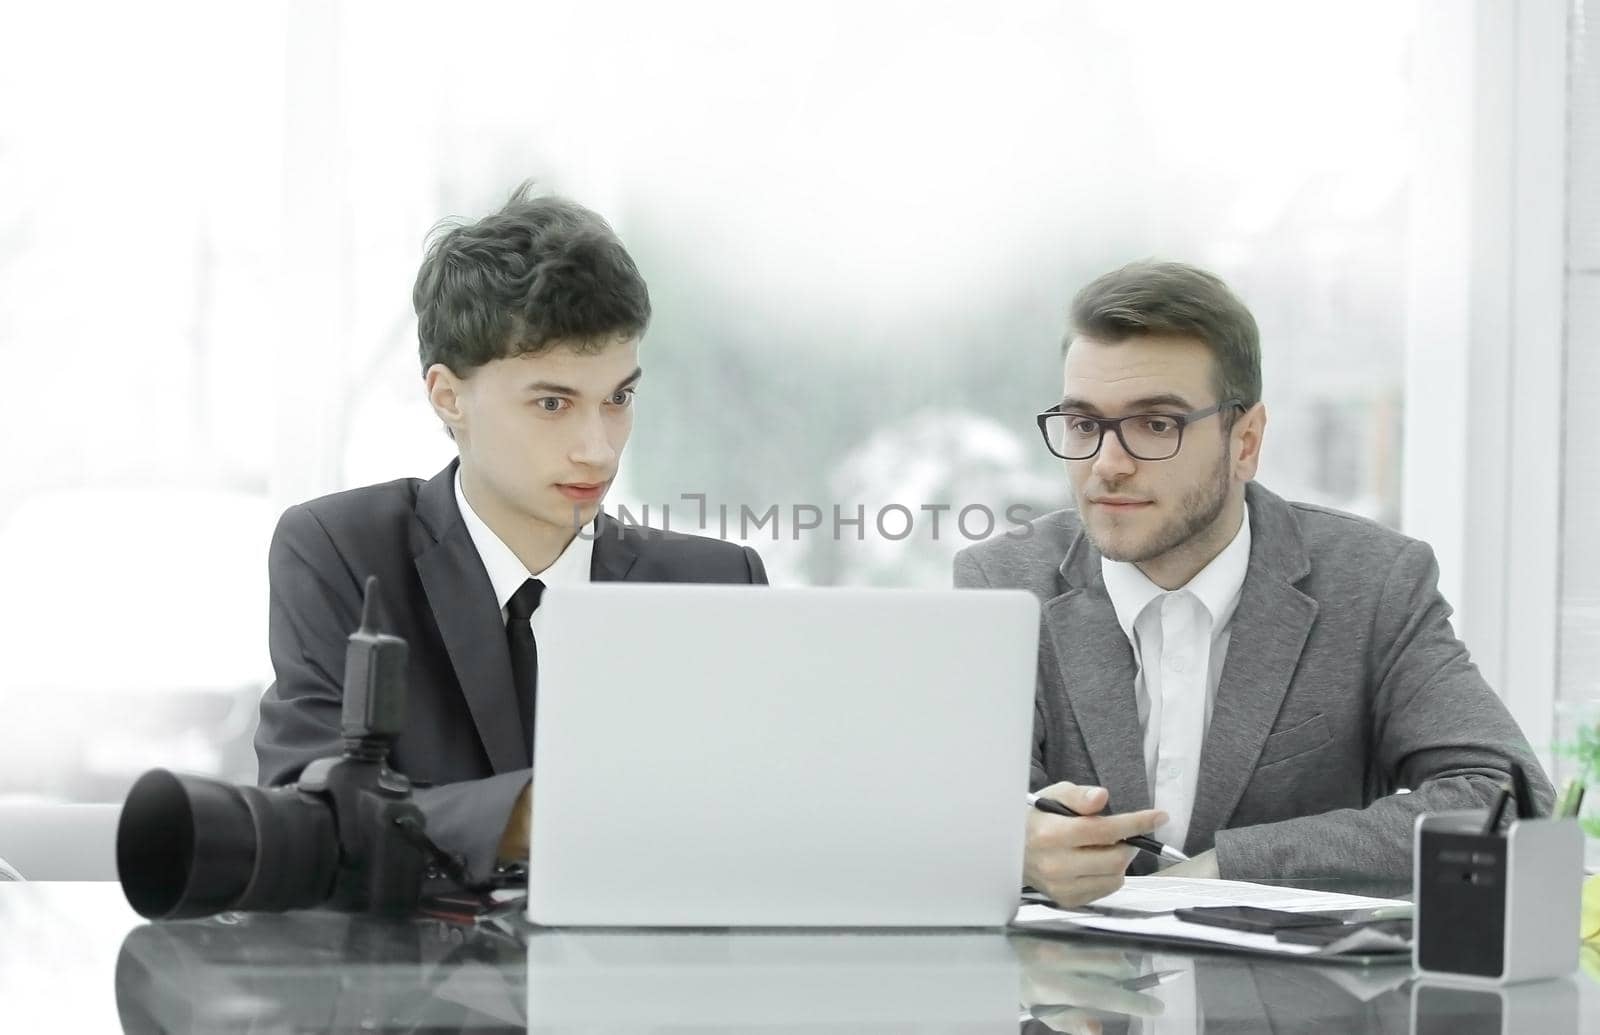 two qualified photographers discuss photos to upload files on a laptop .